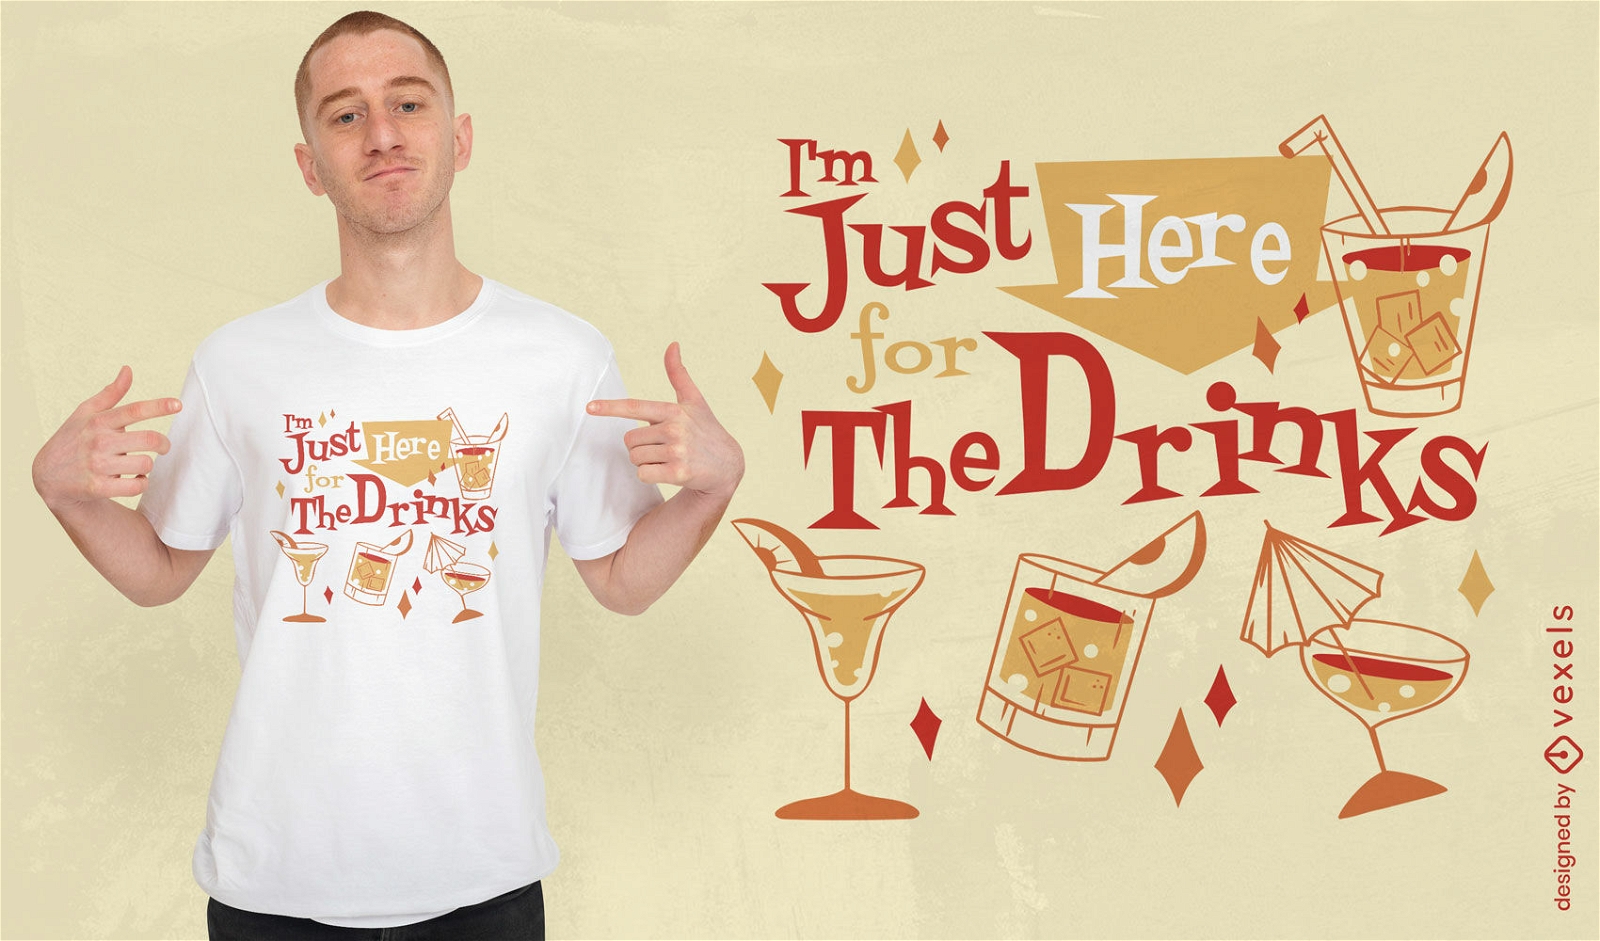 Christmas drinks quote t-shirt design